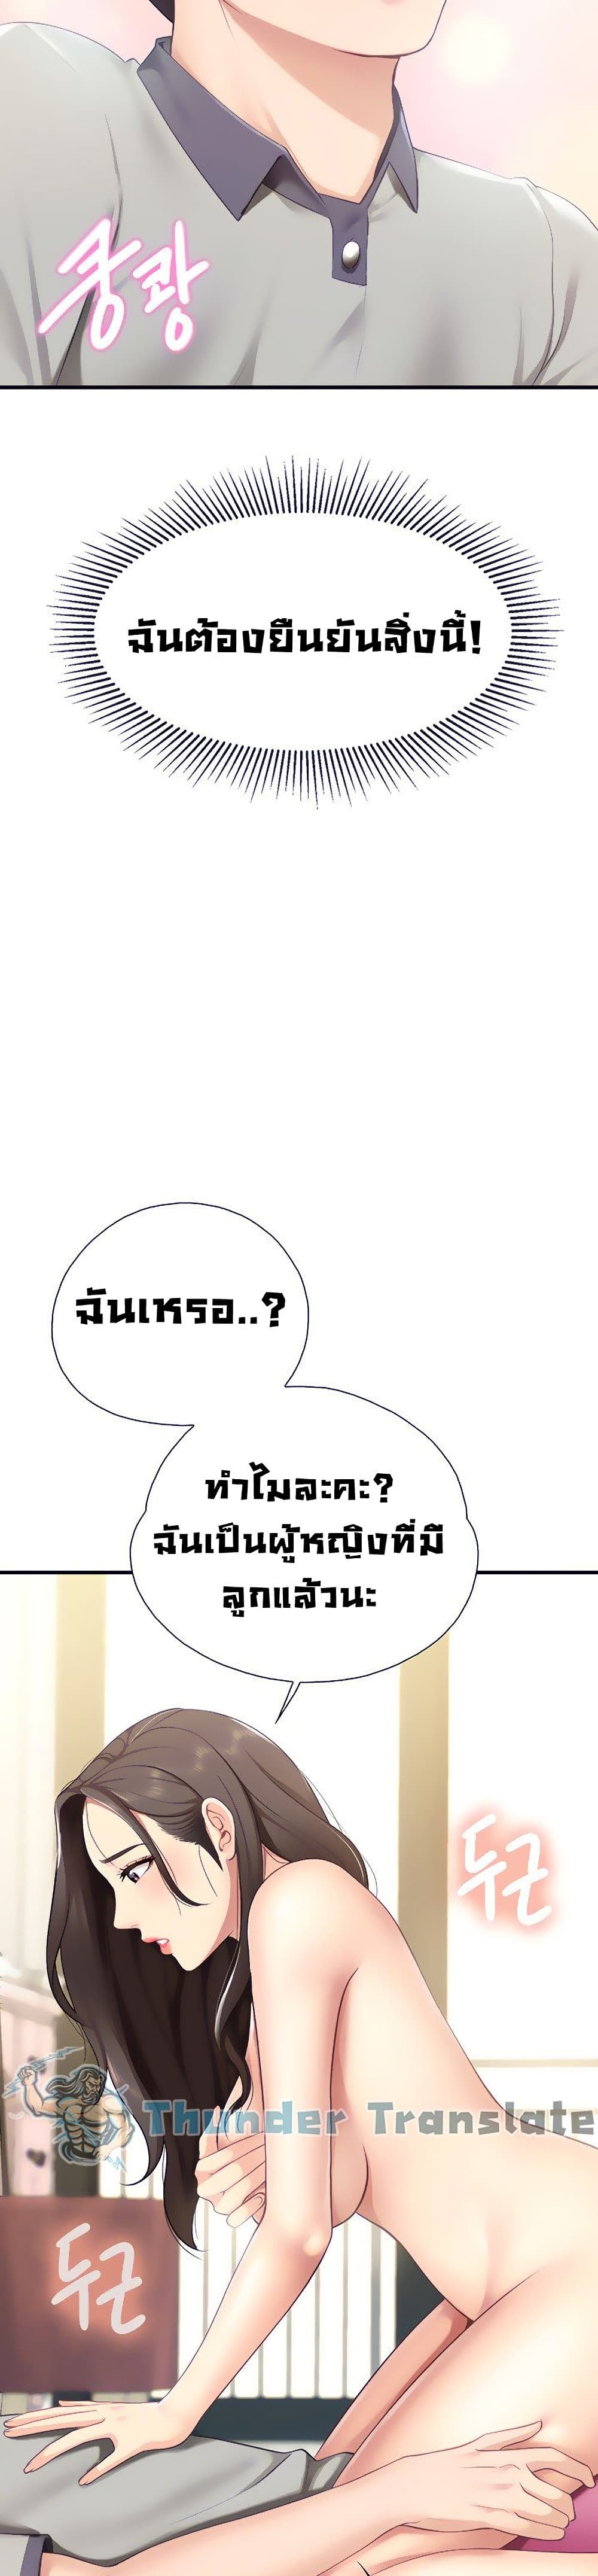 Welcome To Kids Cafe’ 15 ภาพ 15